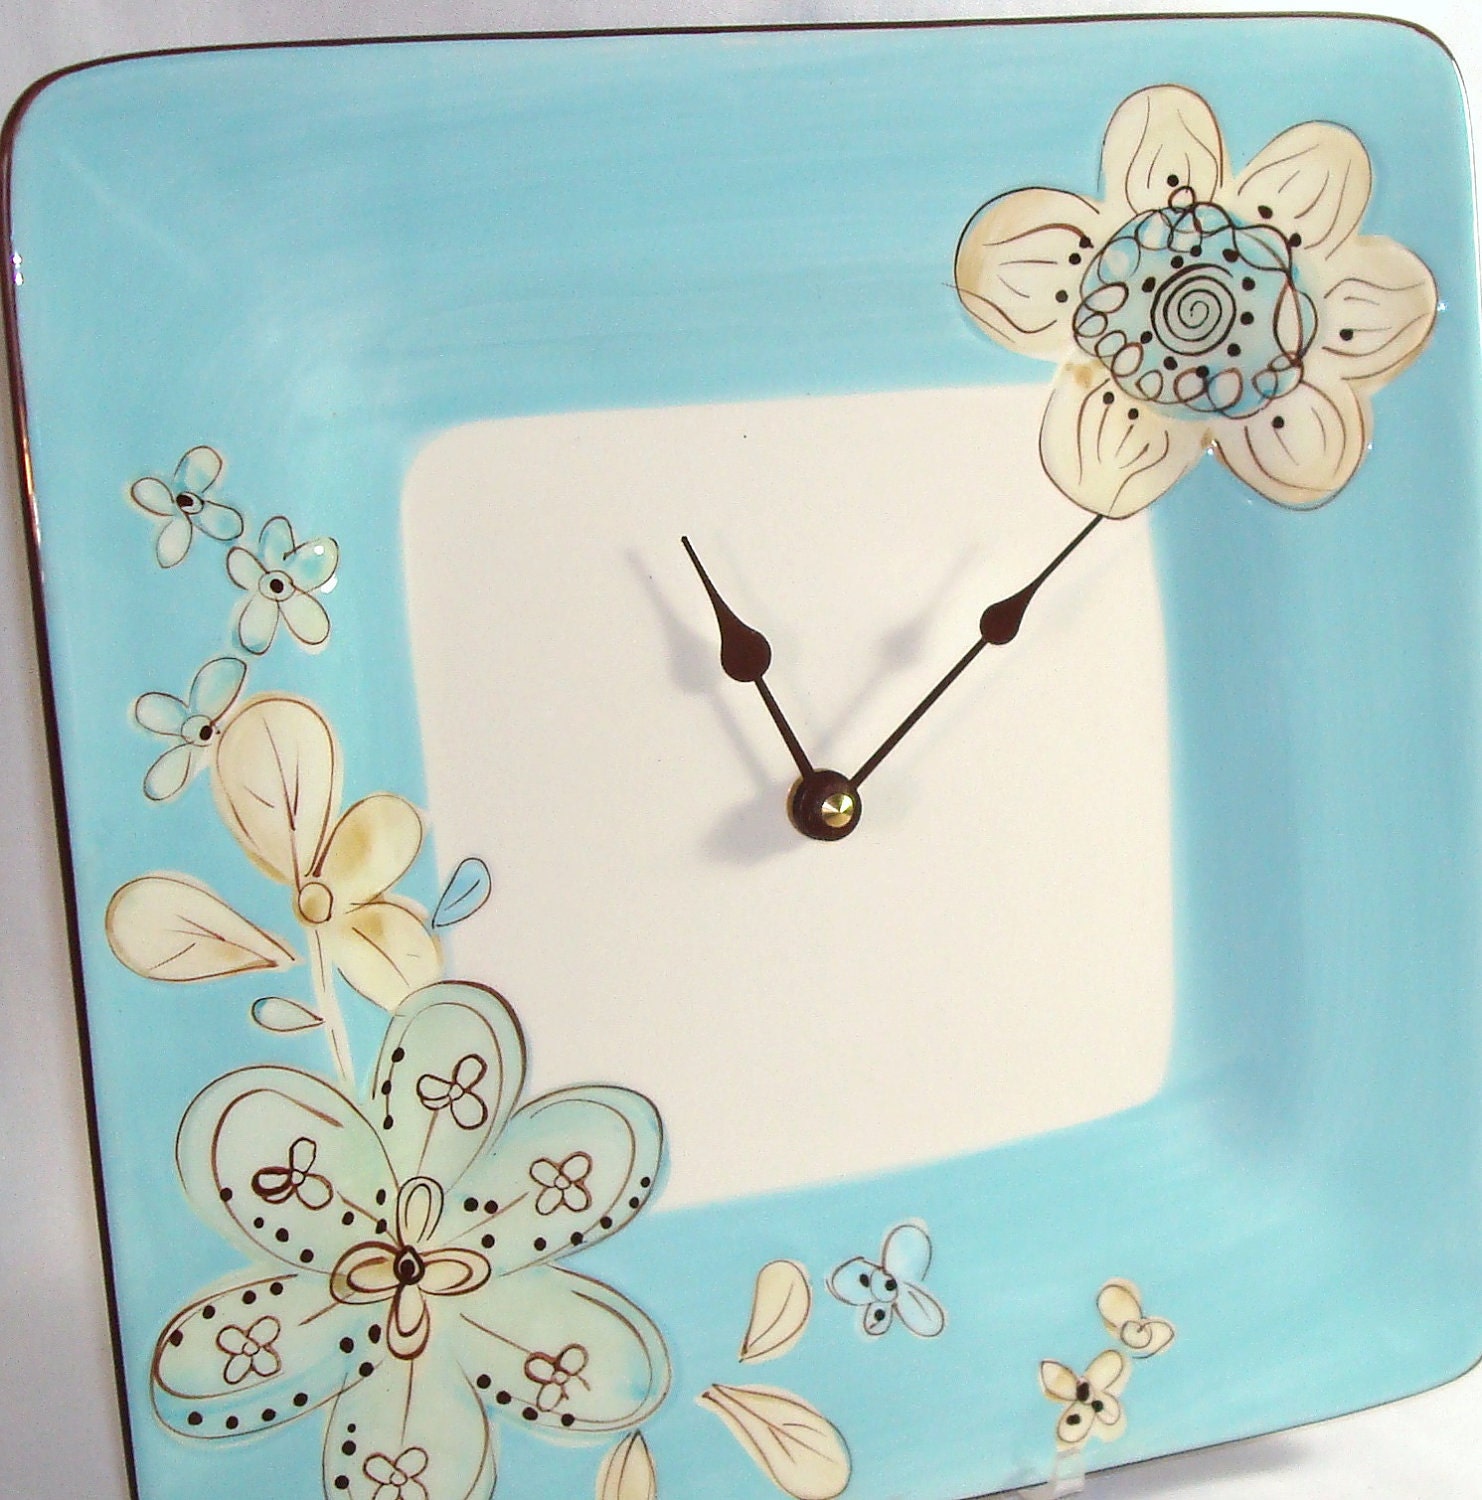 Wall Clock in Aqua Brown and Cream - Flower - Ceramic Plate Wall Clock No. 707 (10-1/2 inches)